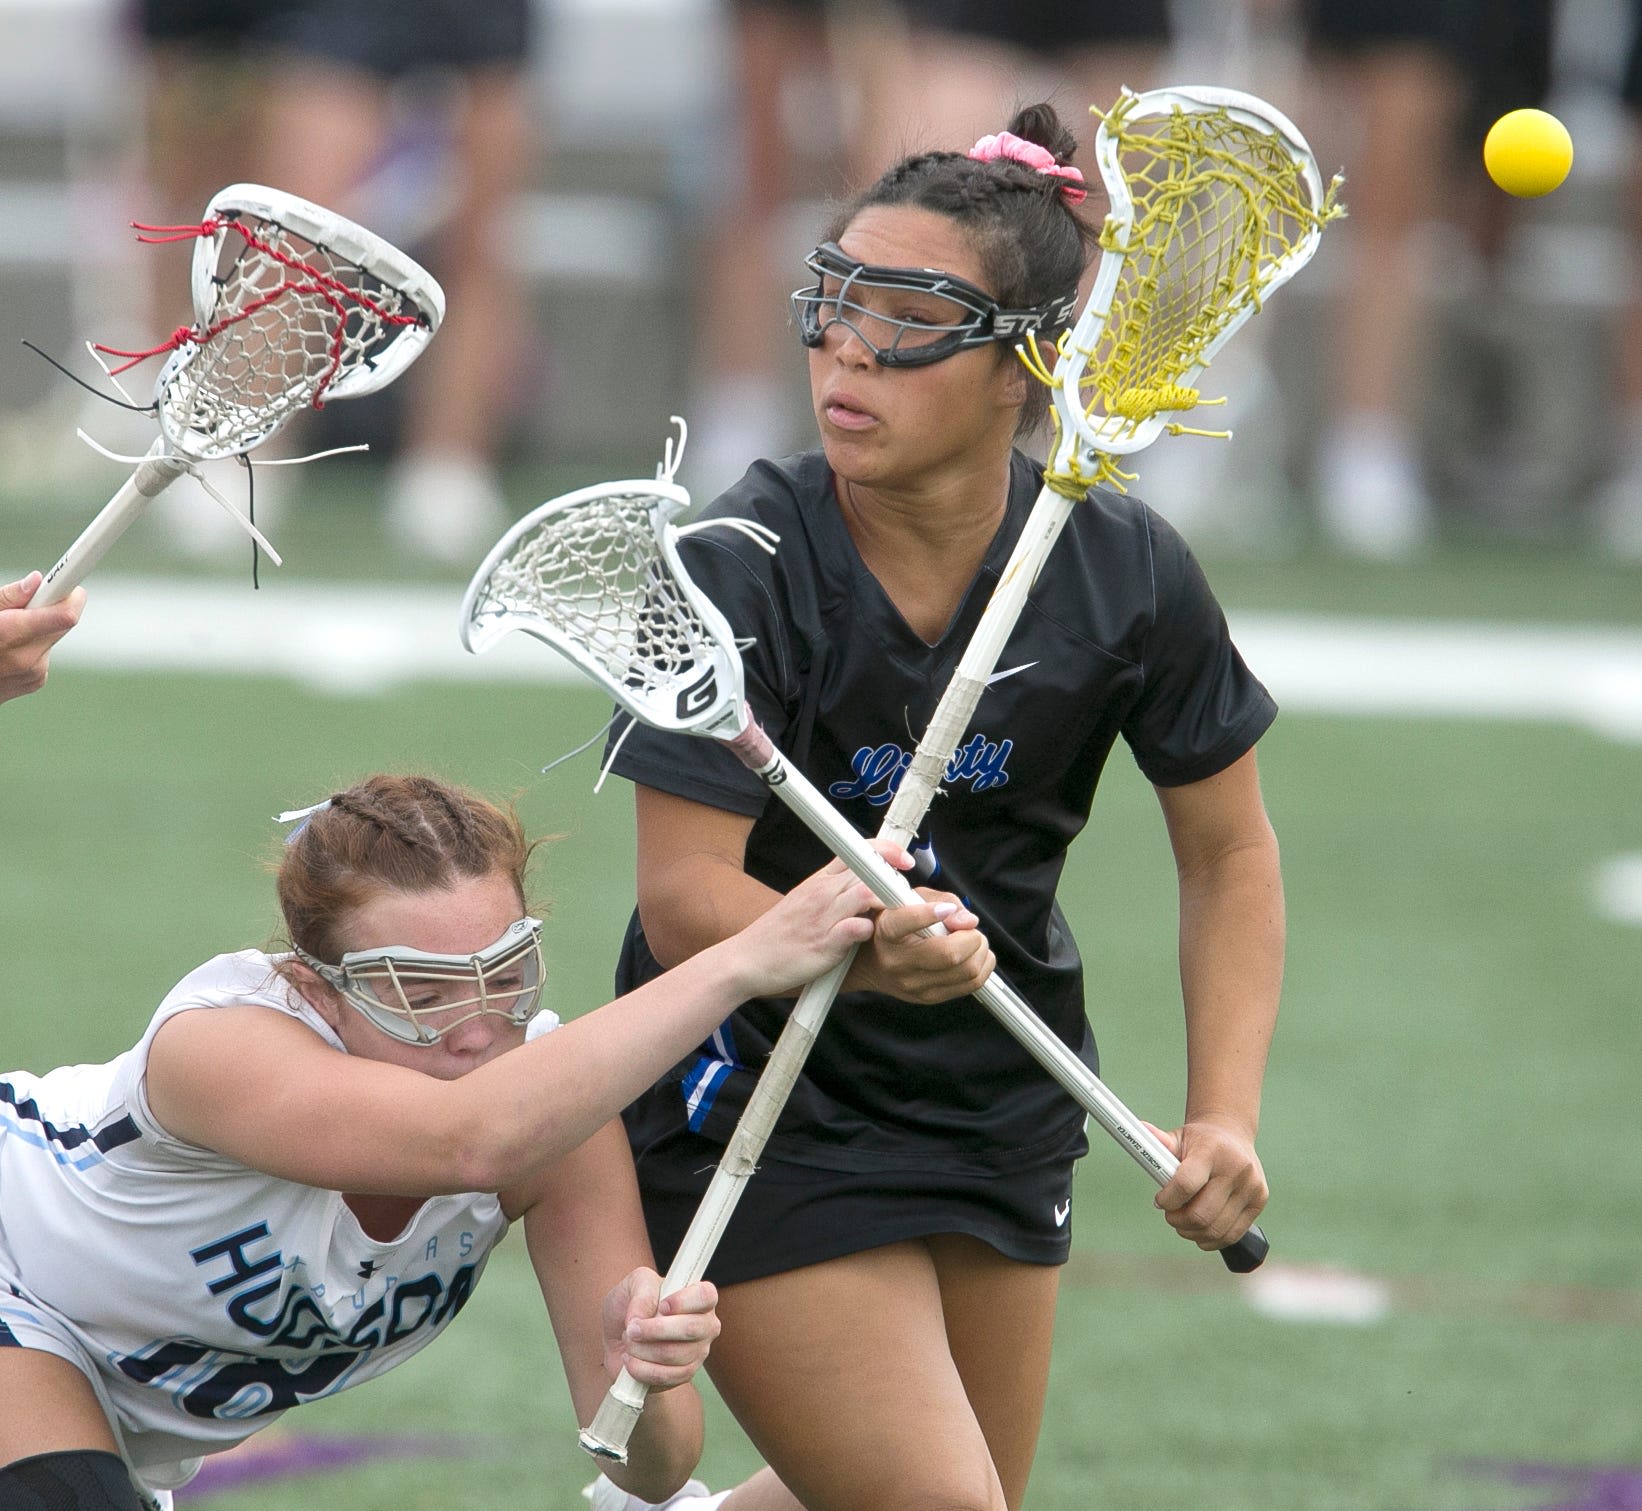 'That really hurts': Olentangy Liberty overwhelms Hudson in girls lacrosse state semifinal